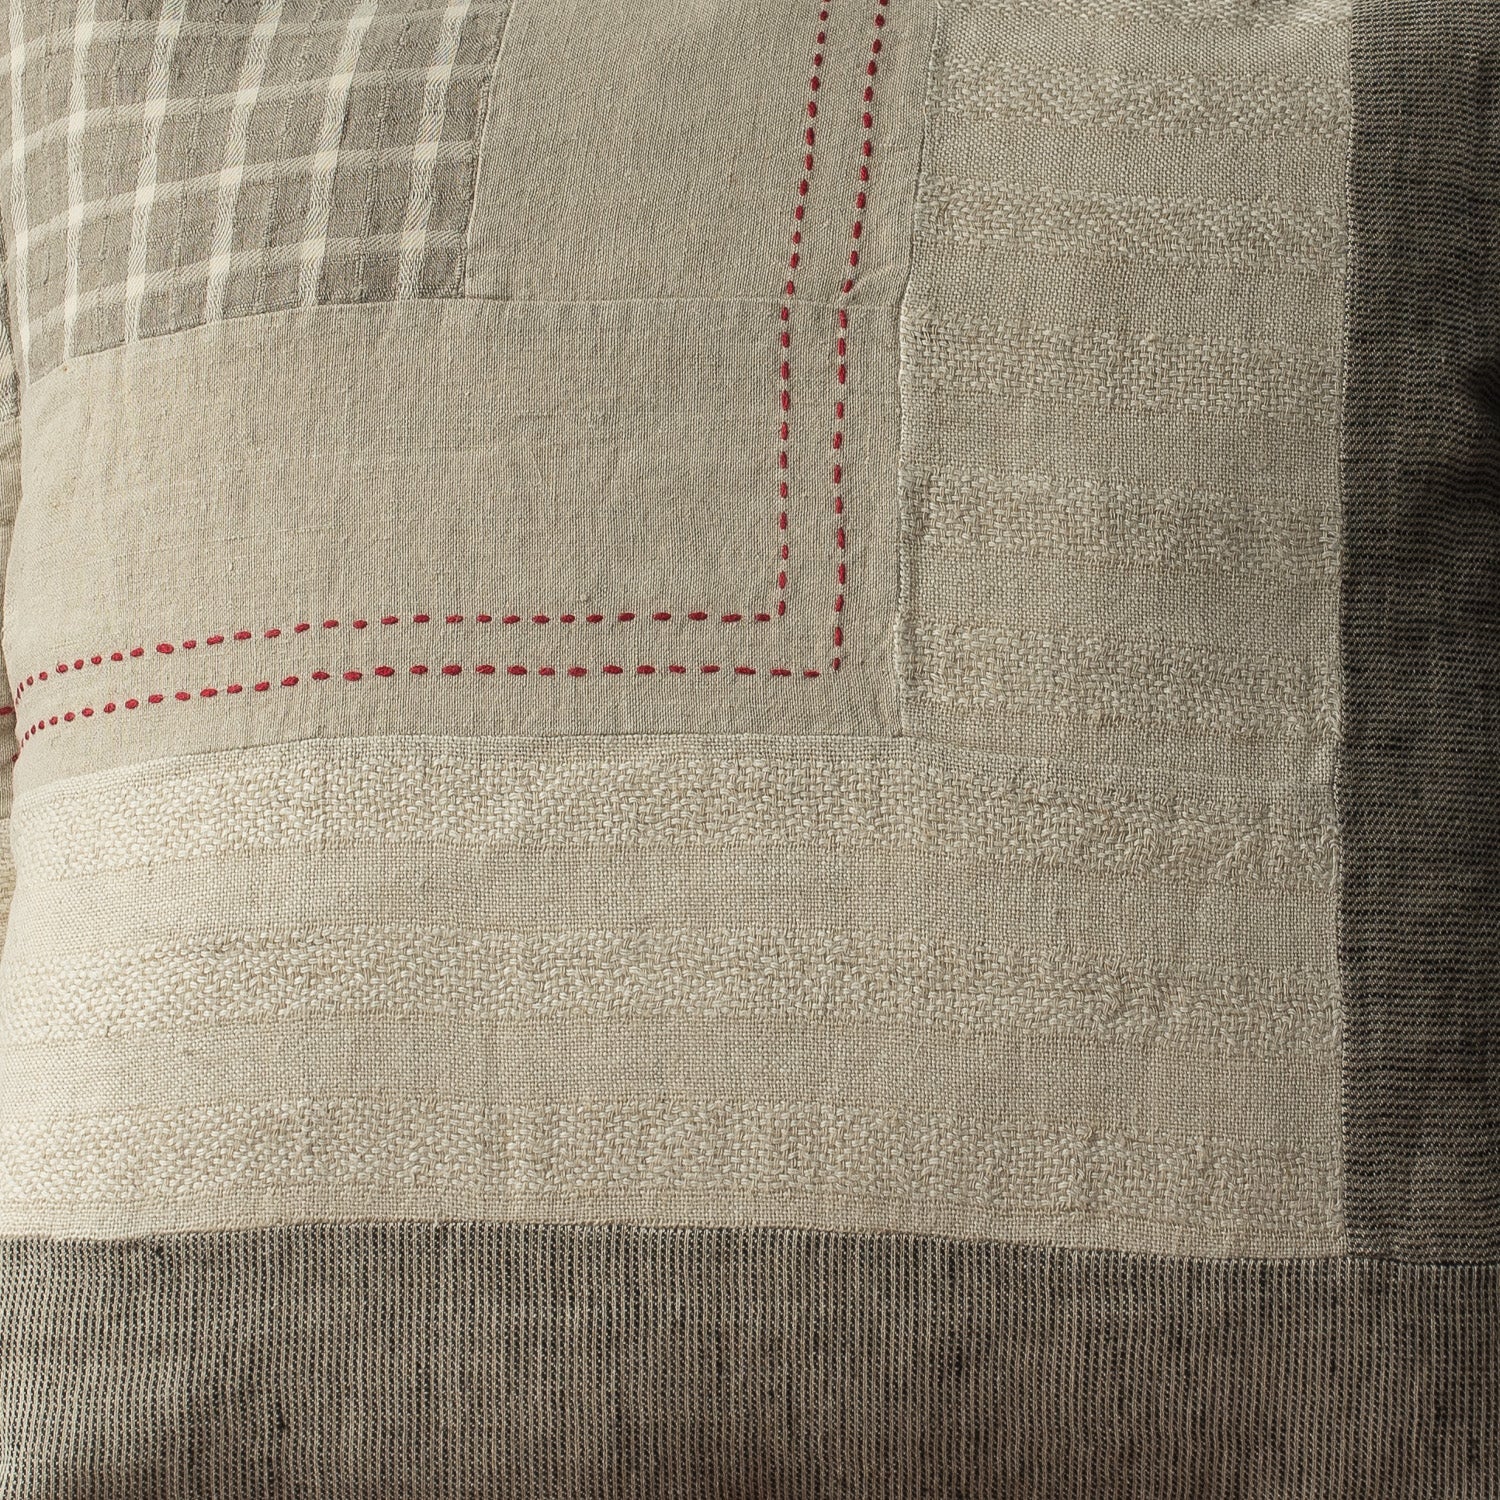 100% Linen Natural Patchwork Cushion Cover